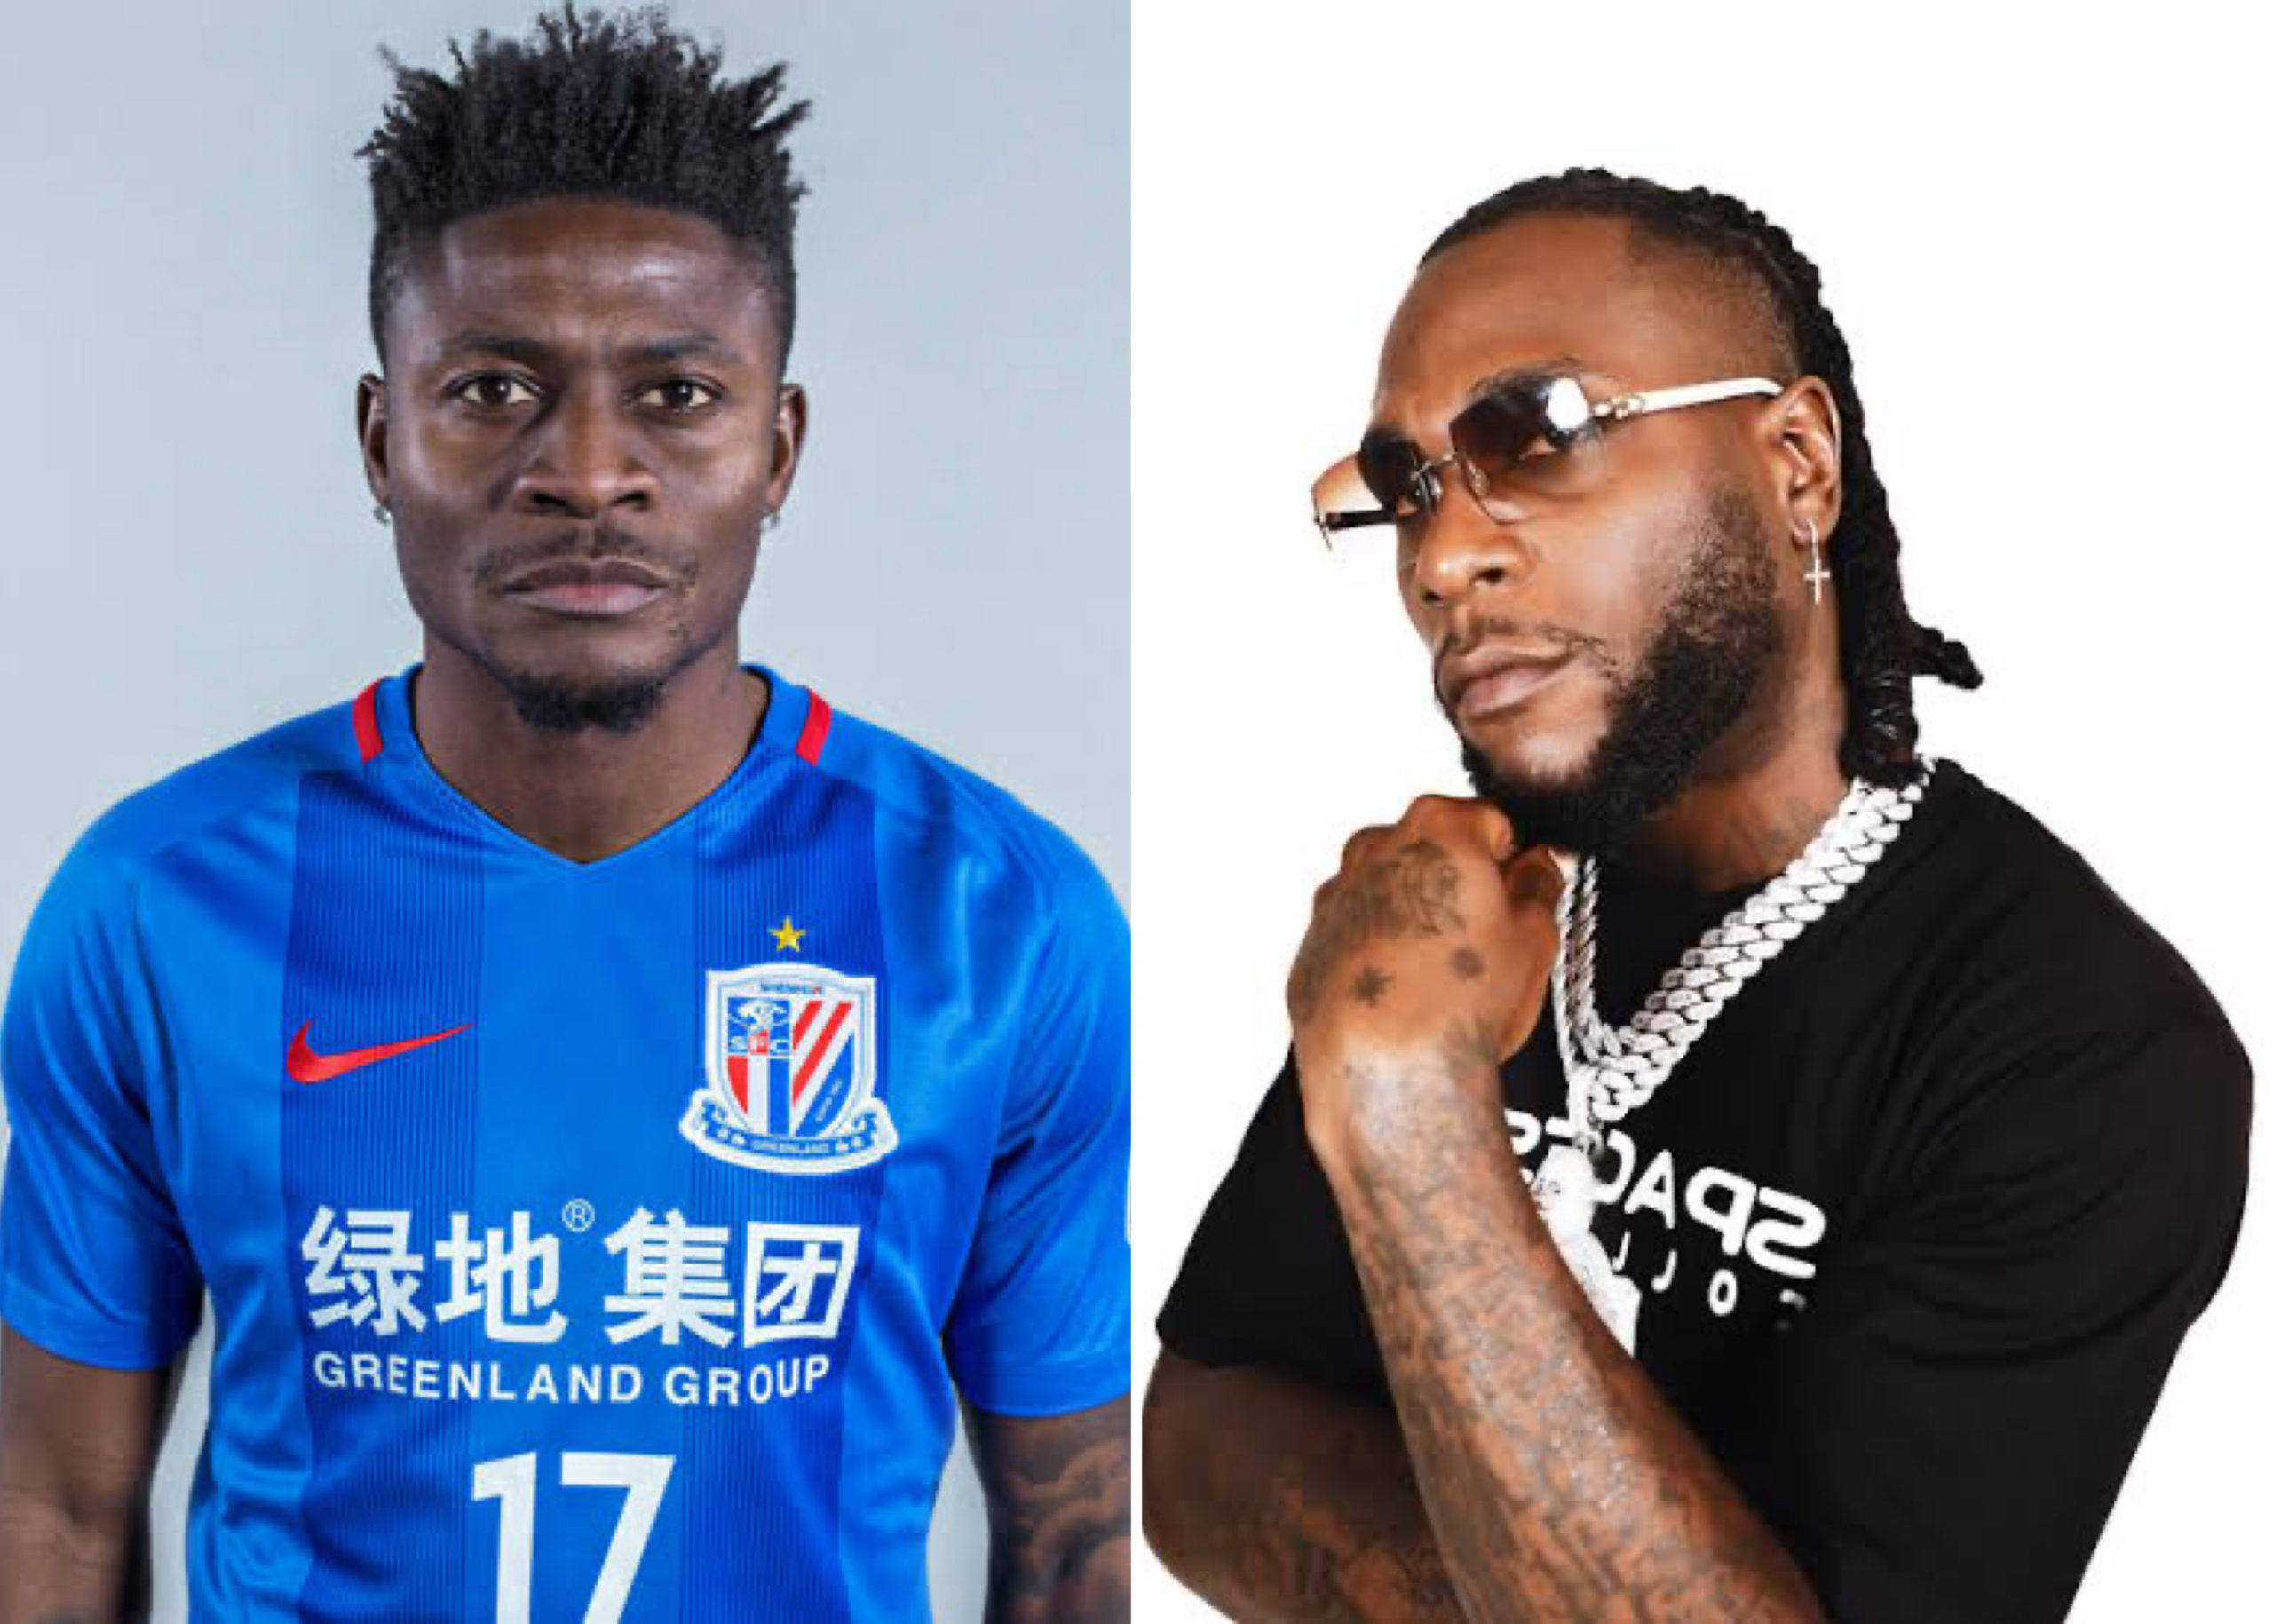 Obafemi Martins Confirms Clash With Burna Boy, Says Issue Has Been Resolved